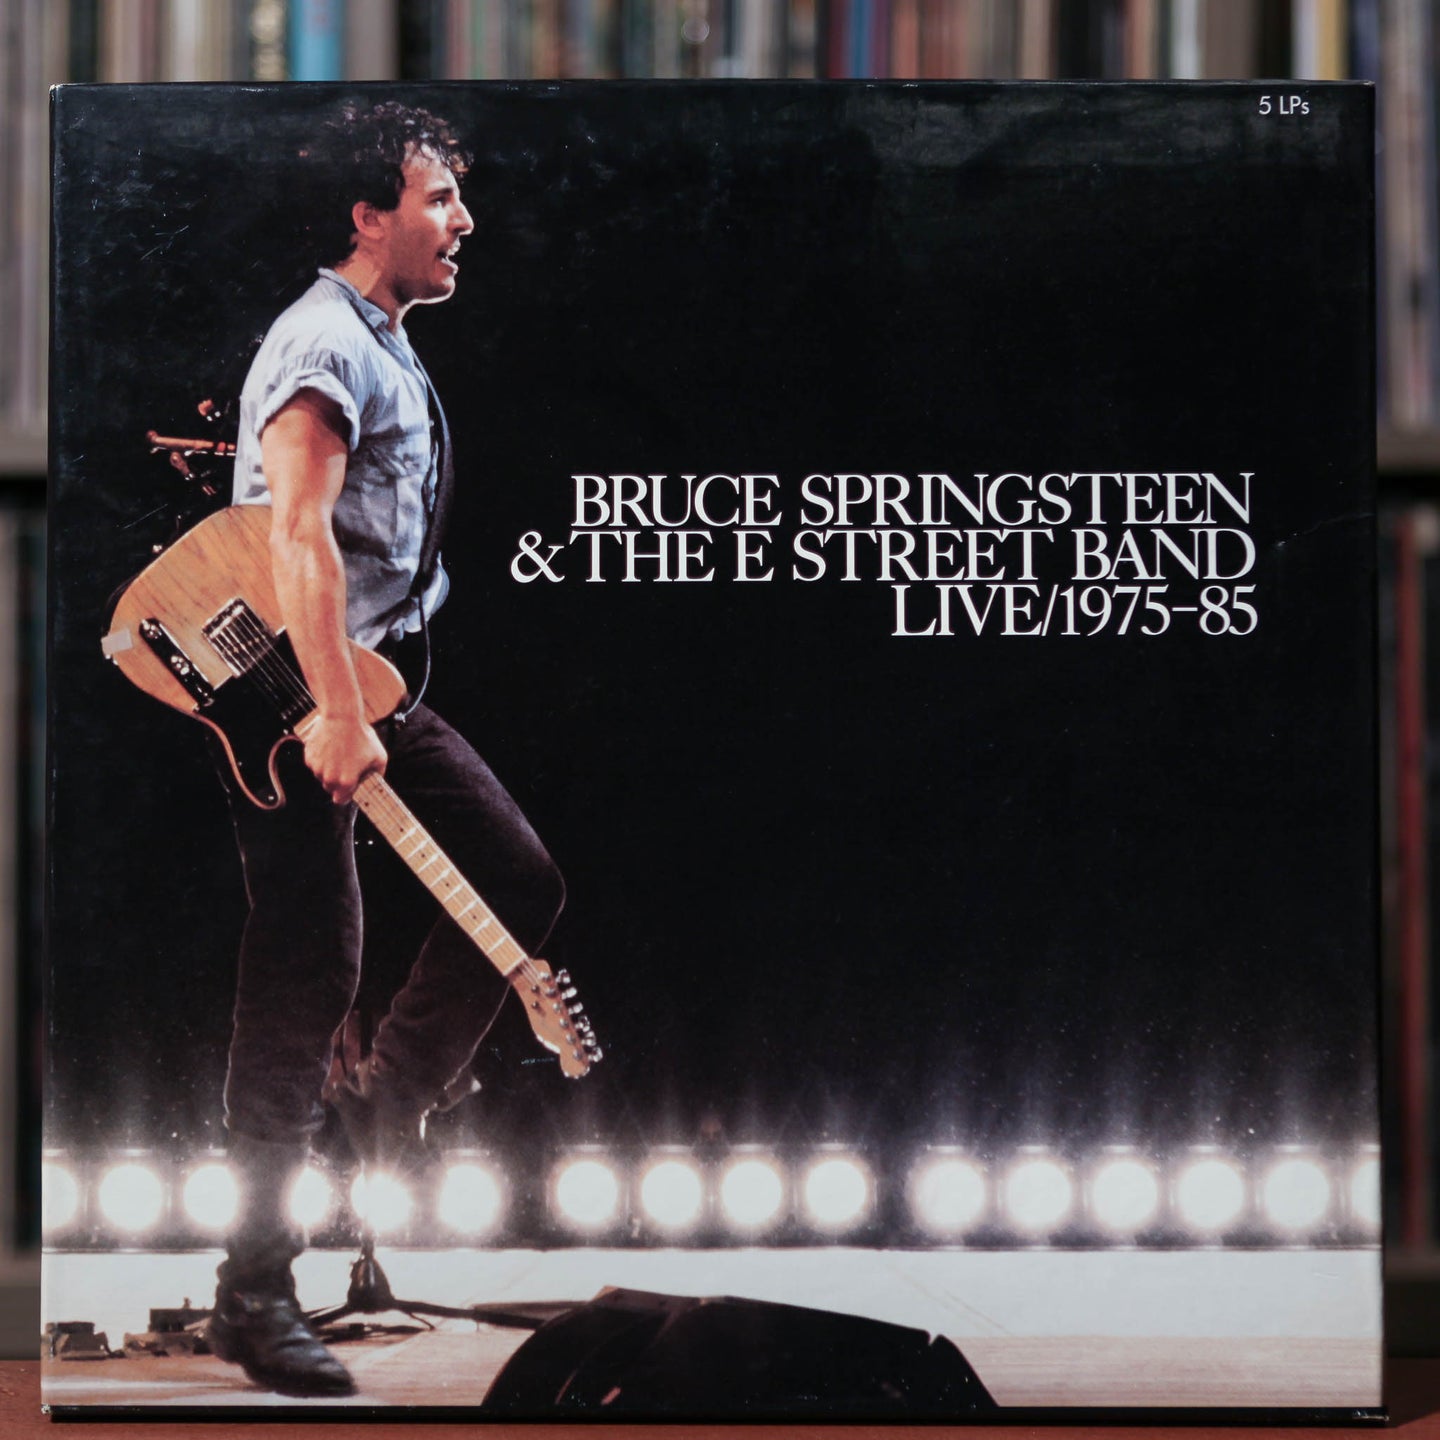 Bruce Springsteen & The E Street Band - 5LP LIVE/1975-85 - 1986 Columbia, VG+/VG+